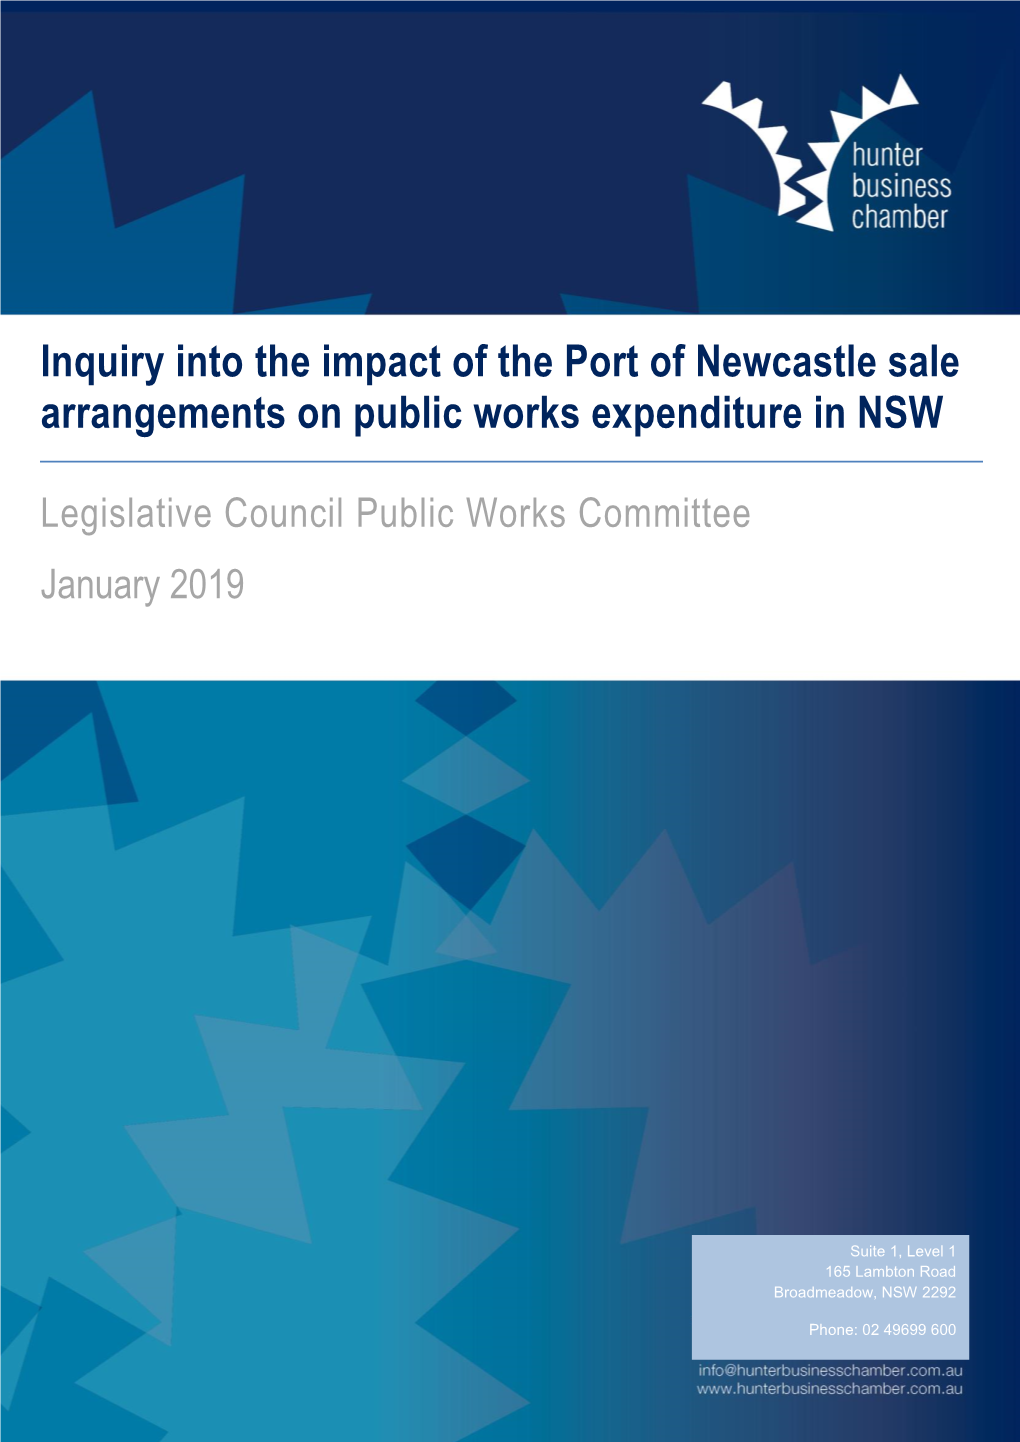 Inquiry Into the Port of Newcastle Sale Arrangements On